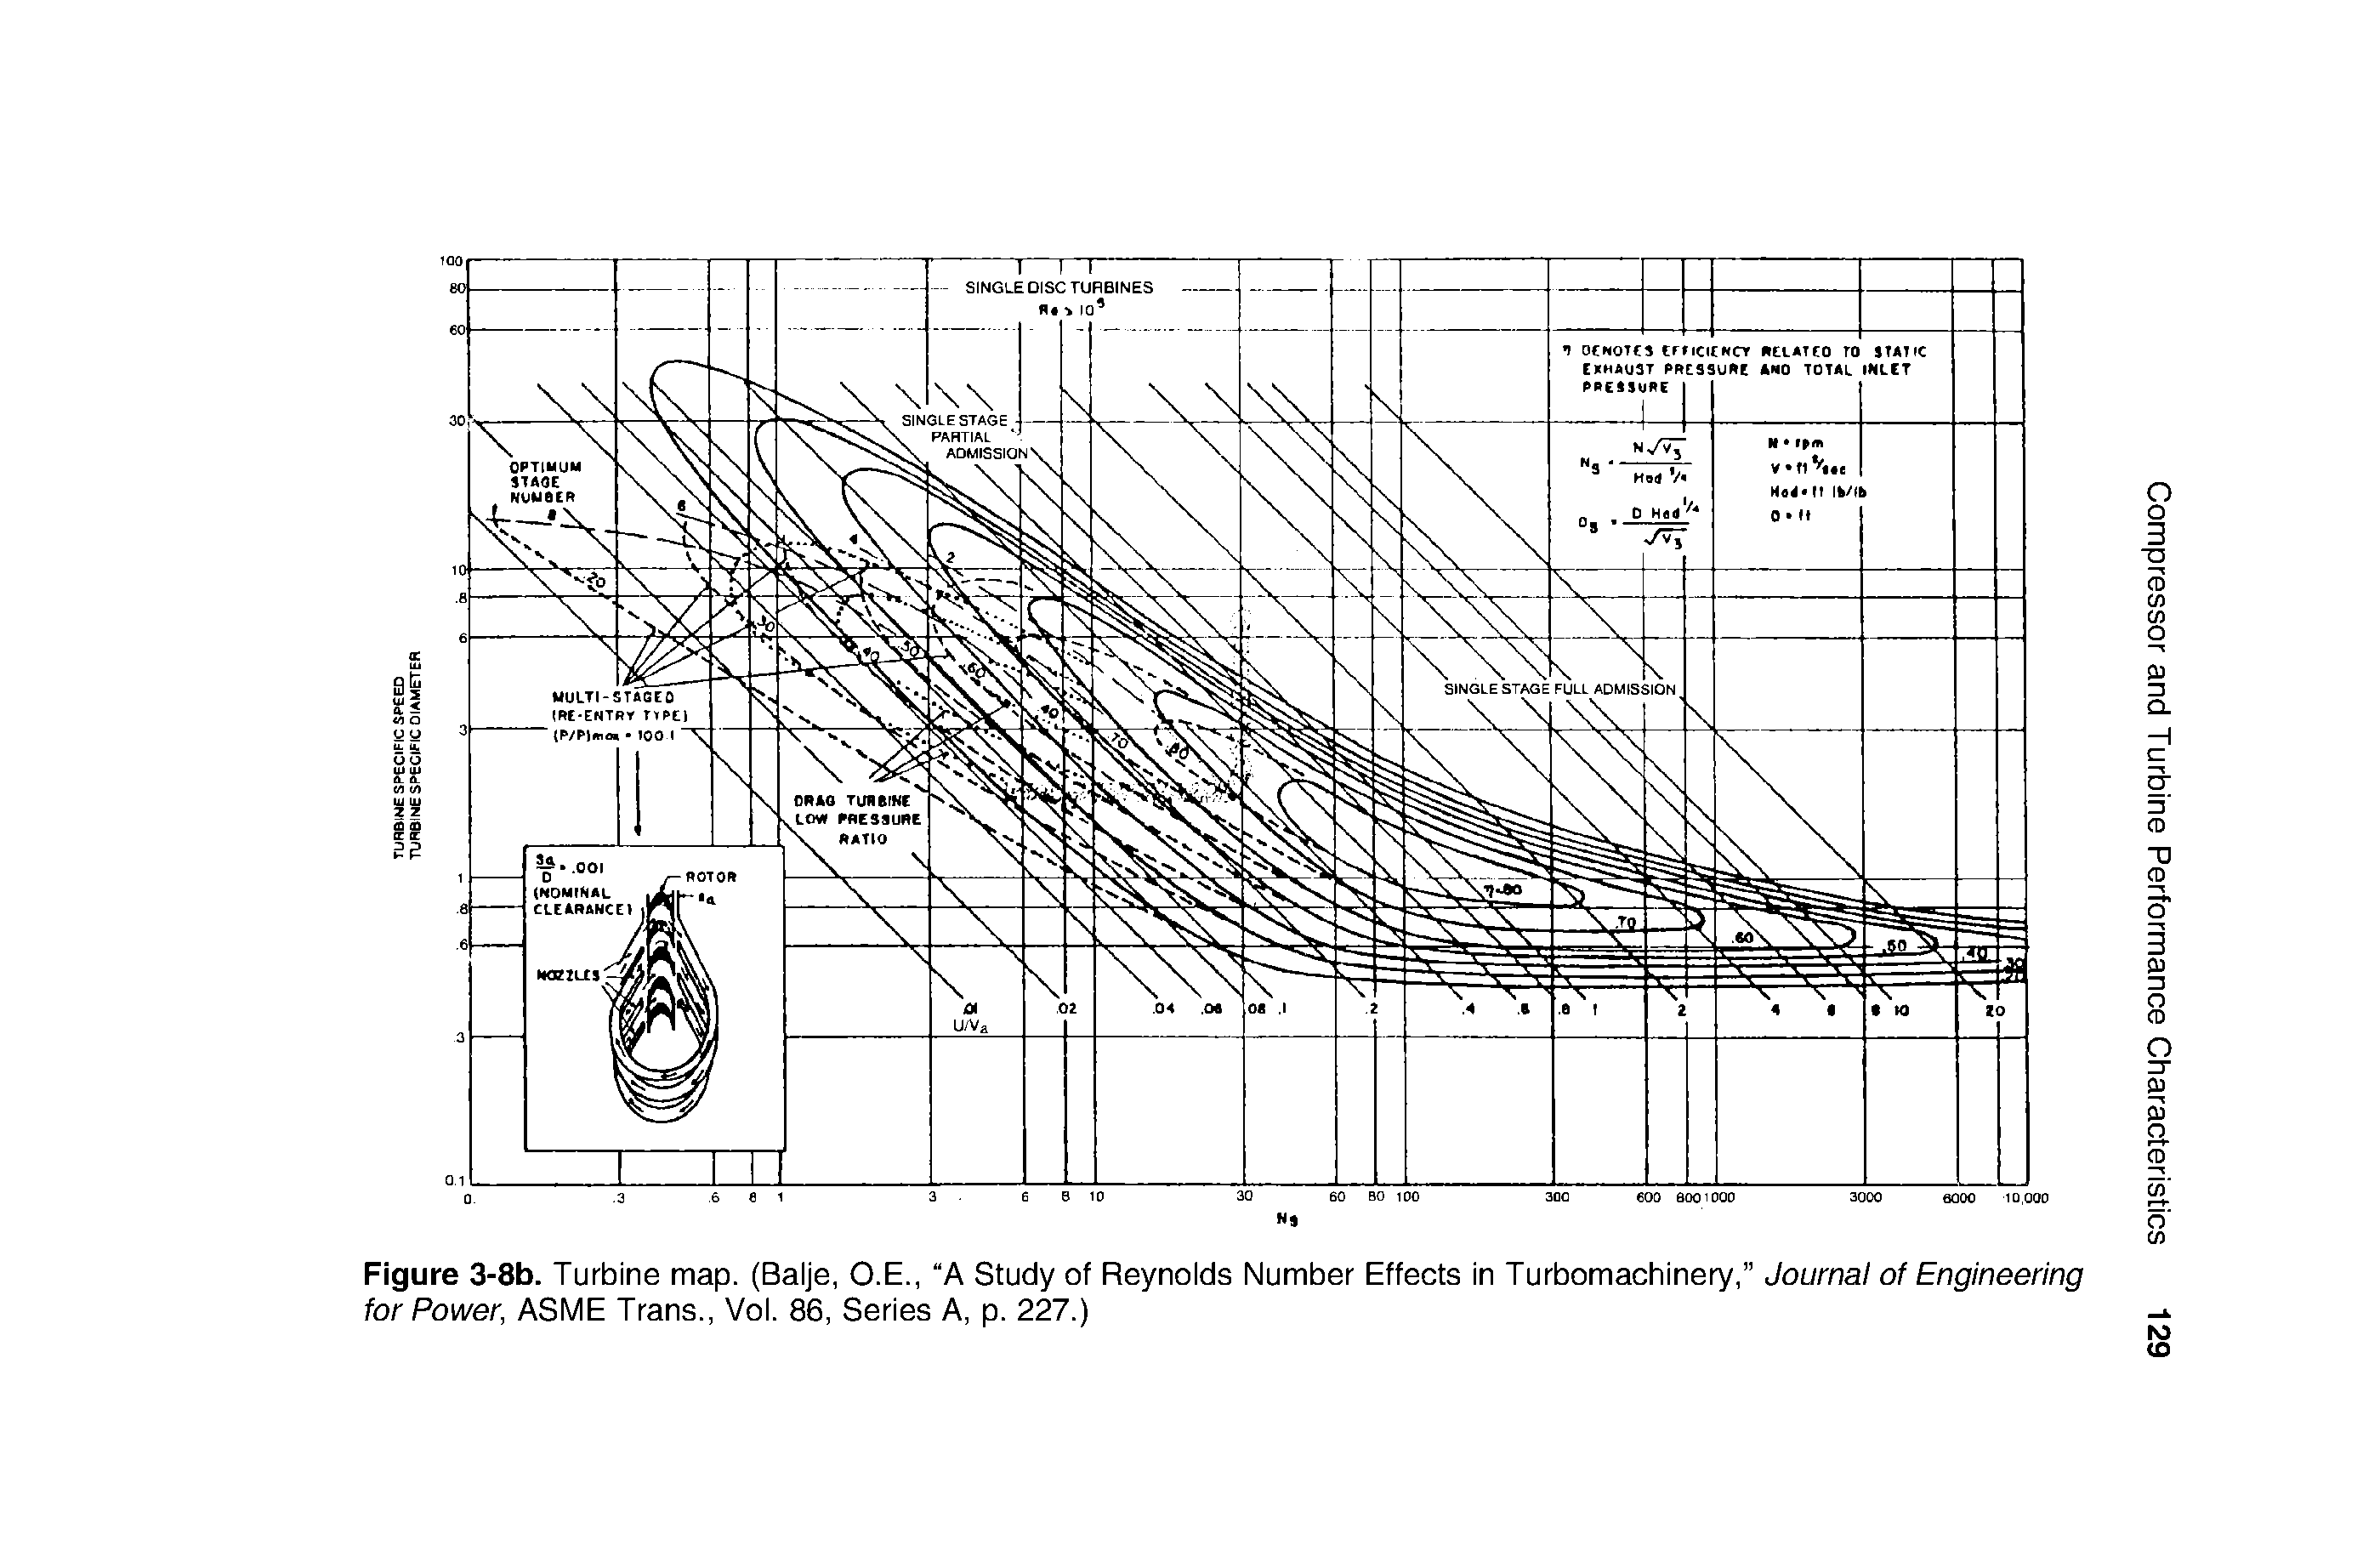 Figure 3-8b. Turbine map. (Balje, O.E., A Study of Reynolds Number Effects in Turbomachinery, Journal of Engineering for Power, ASME Trans., Vol. 86, Series A, p. 227.)...